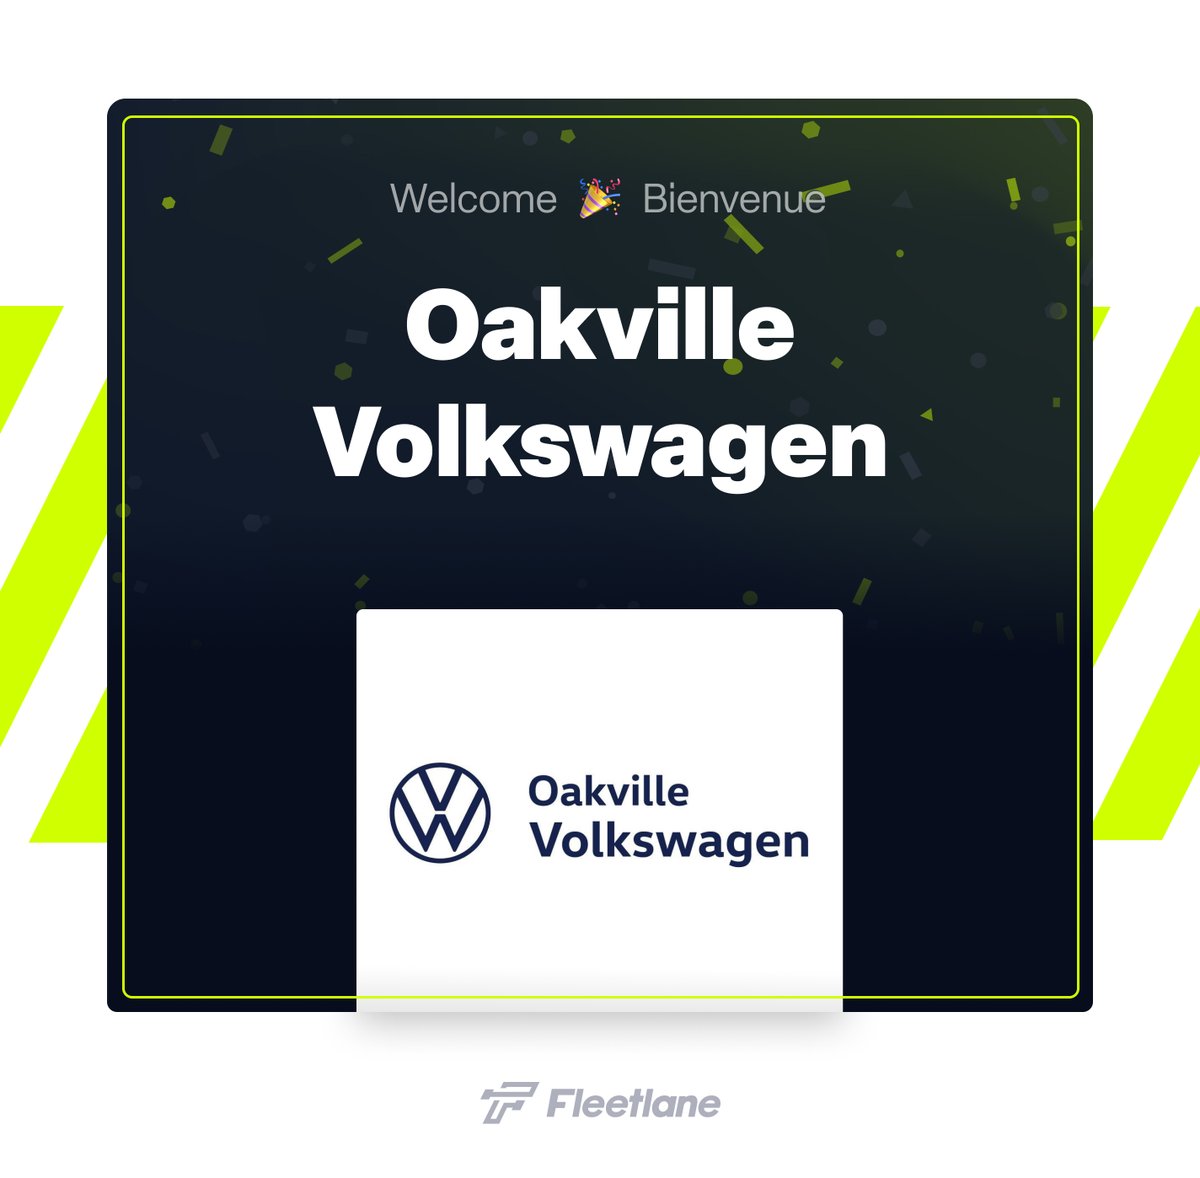 We’re thrilled to announce that Oakville Volkswagen has chosen Fleetlane to manage their loaner car and mobility services. With our all-in-one solution, they're saving time, money, and provide a top-notch client experience!

#CarDealership #FleetManagement #ConnectedCar